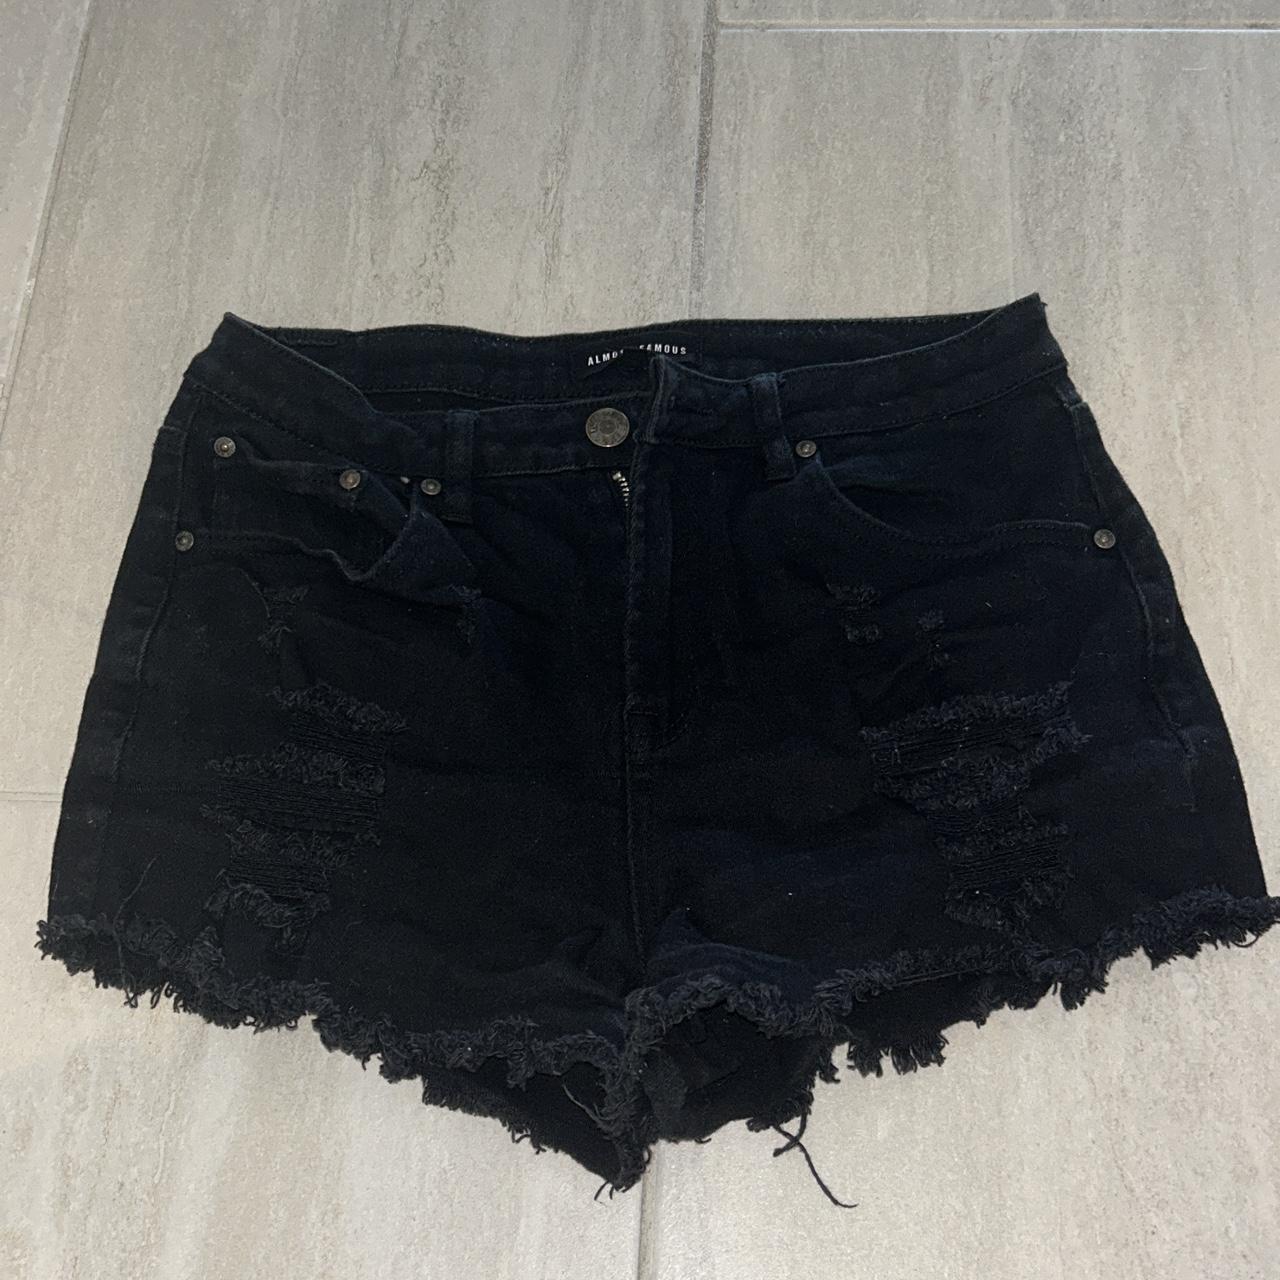 black ripped almost famous shorts size 9 - Depop